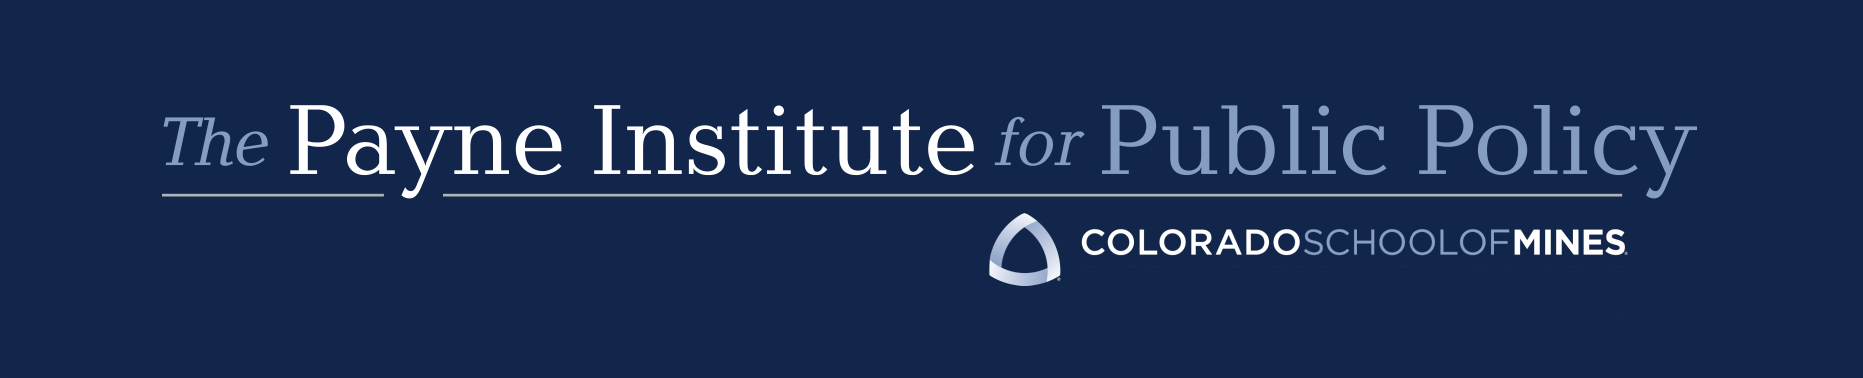 Payne Institute Logo with dark background (solid)